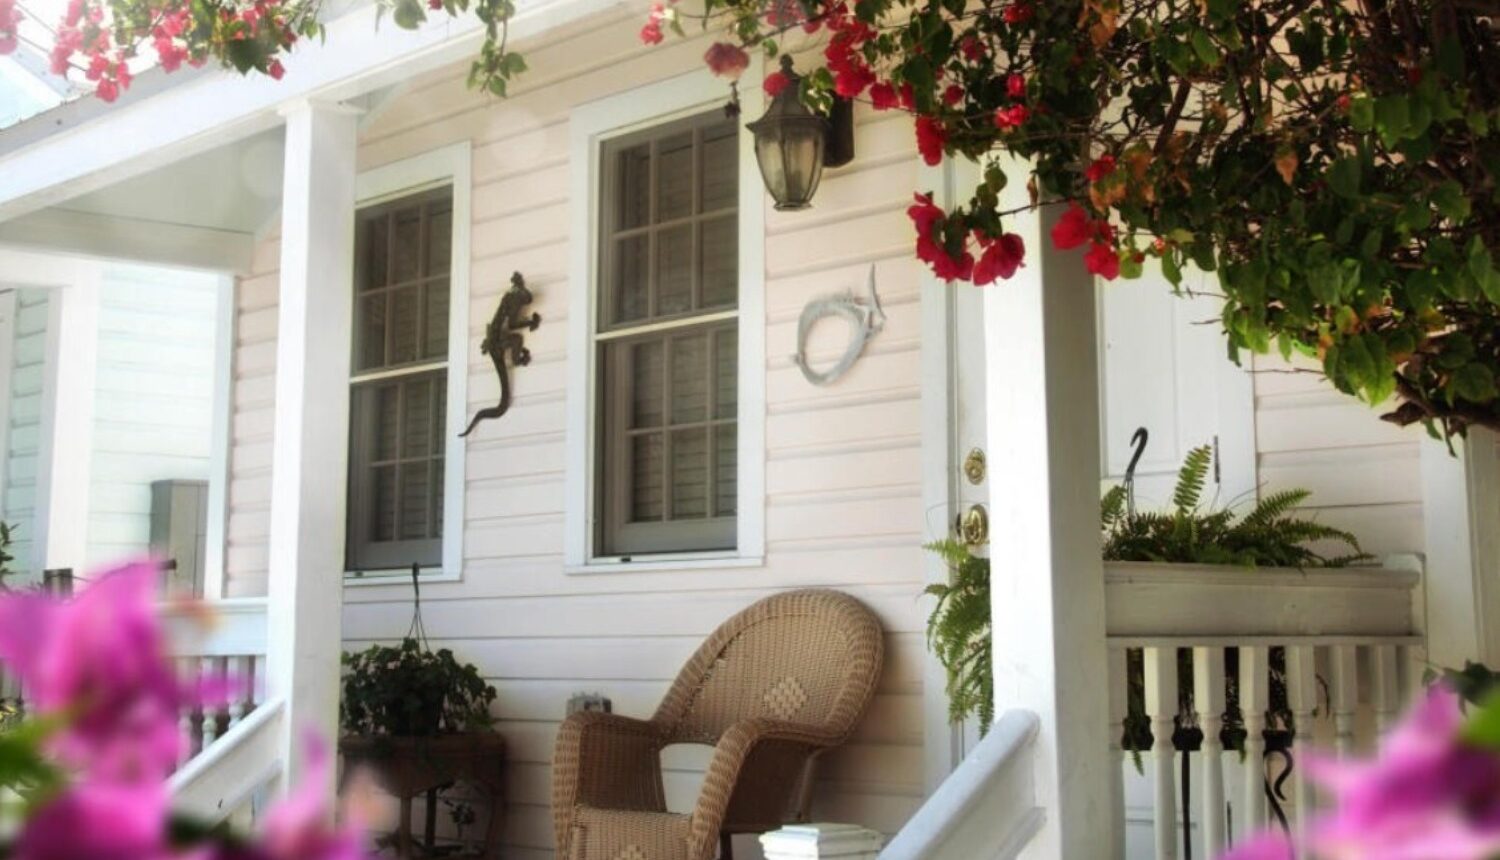 A cozy porch adorned with blooming spring flowers.